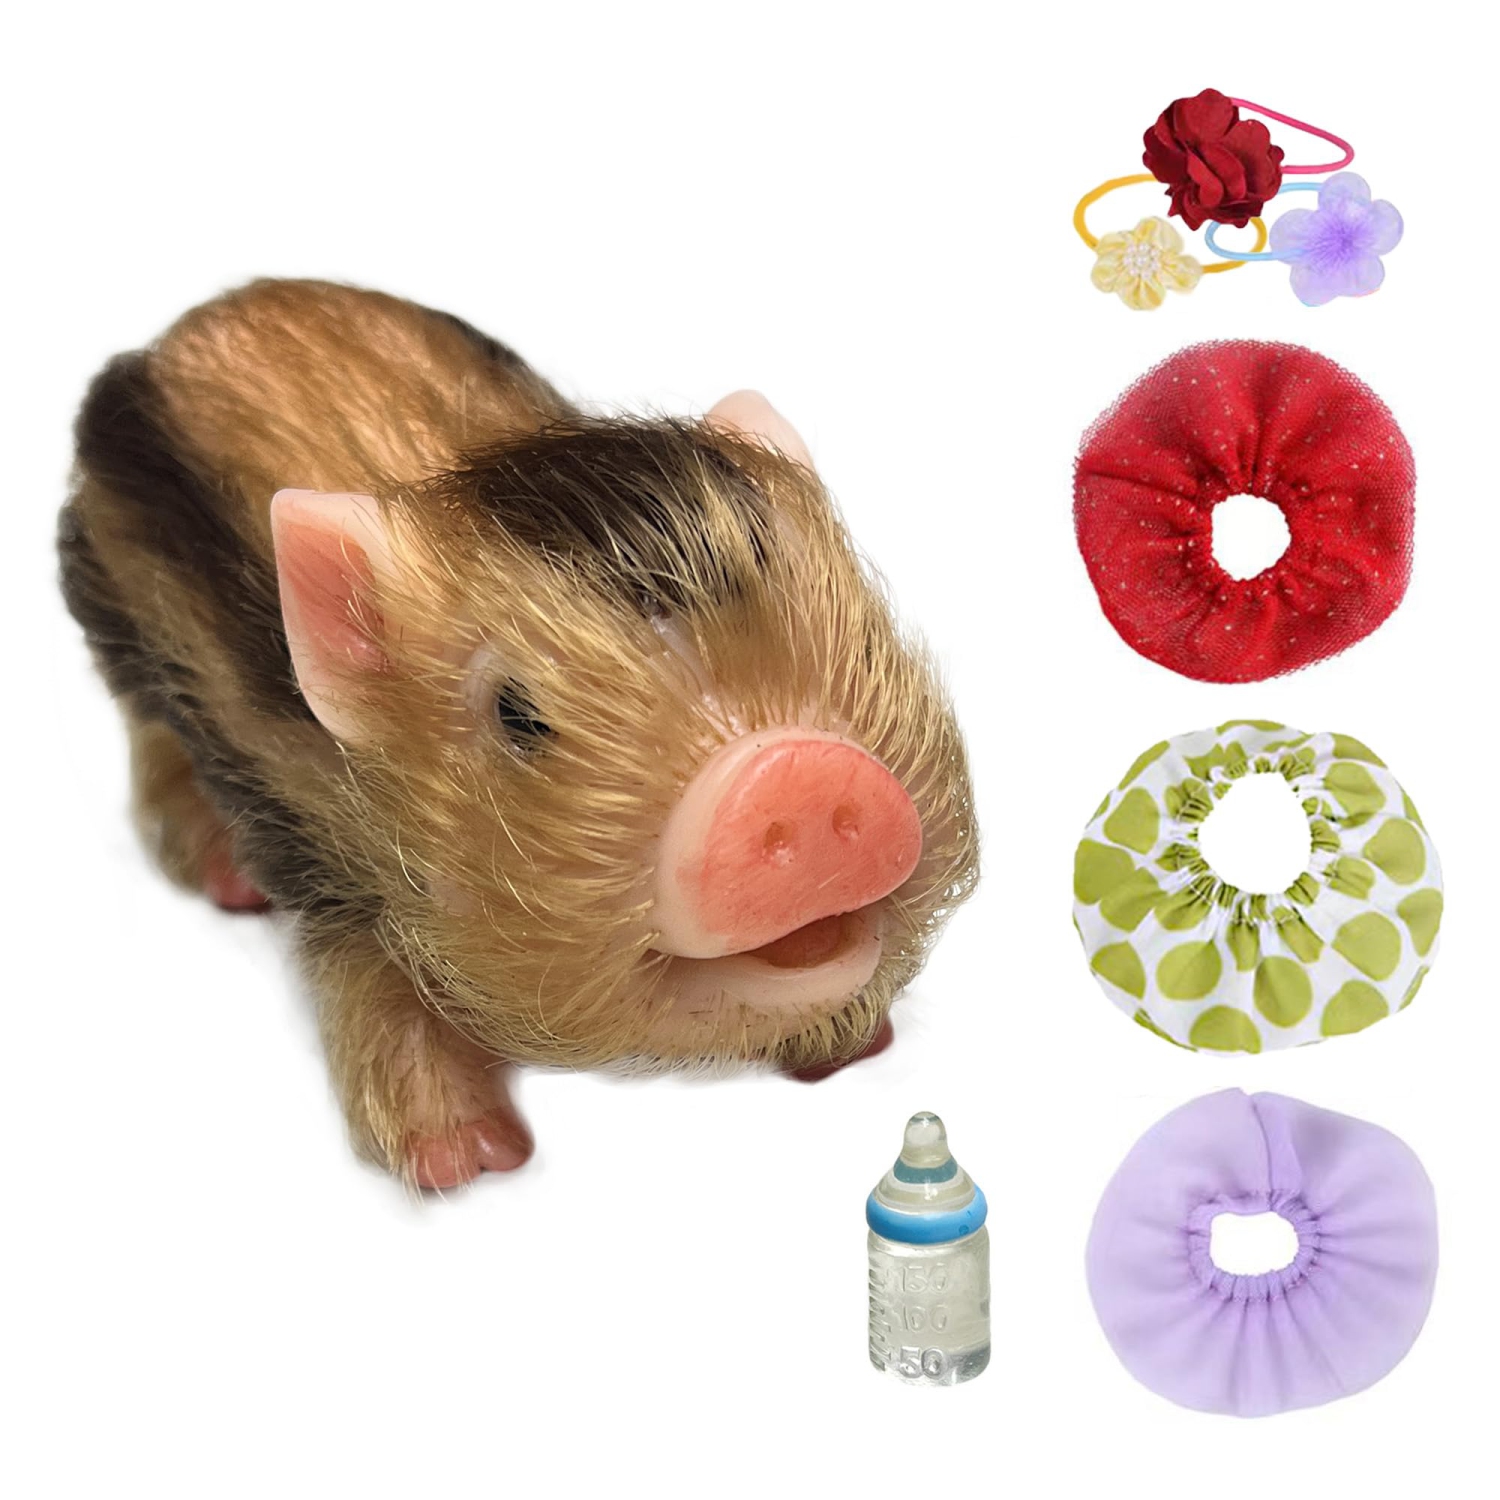 5 Inch Realistic Full Silicone Lifelike Reborn Pig Dolls - Soft and Stylish Real Life Baby Animal Dolls with Toy Accessories for Kids